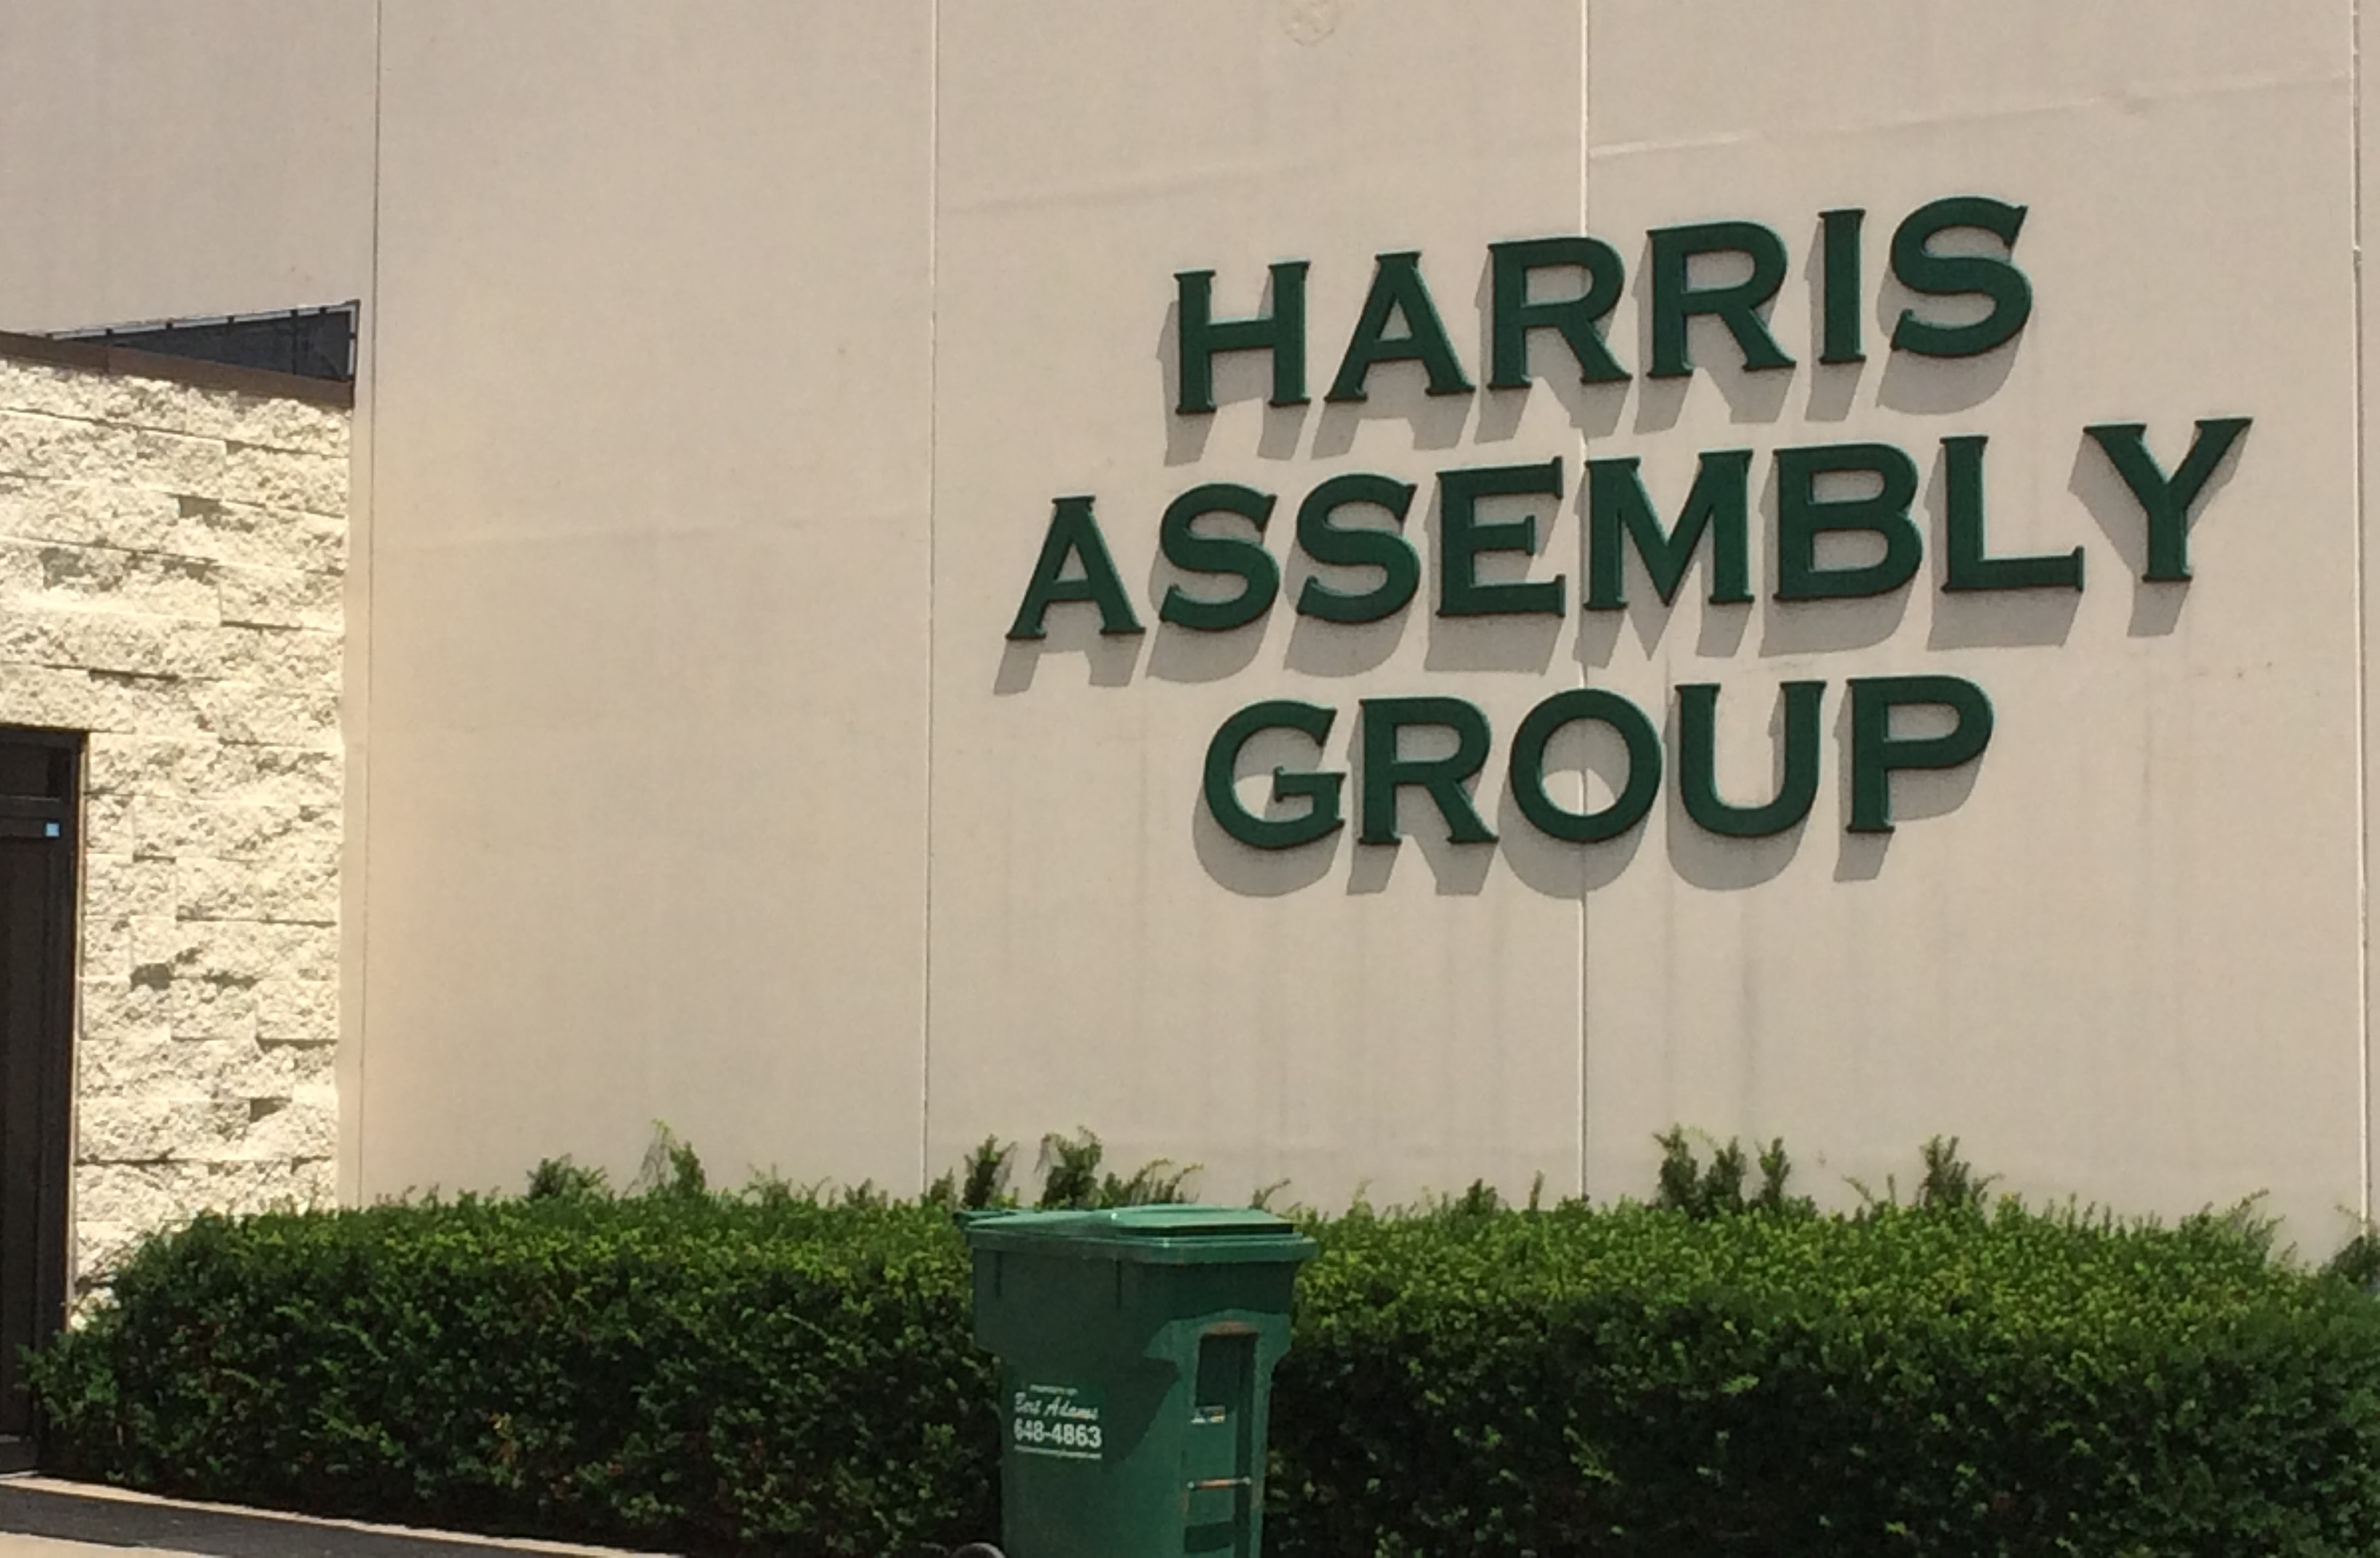 Harris Assembly Group